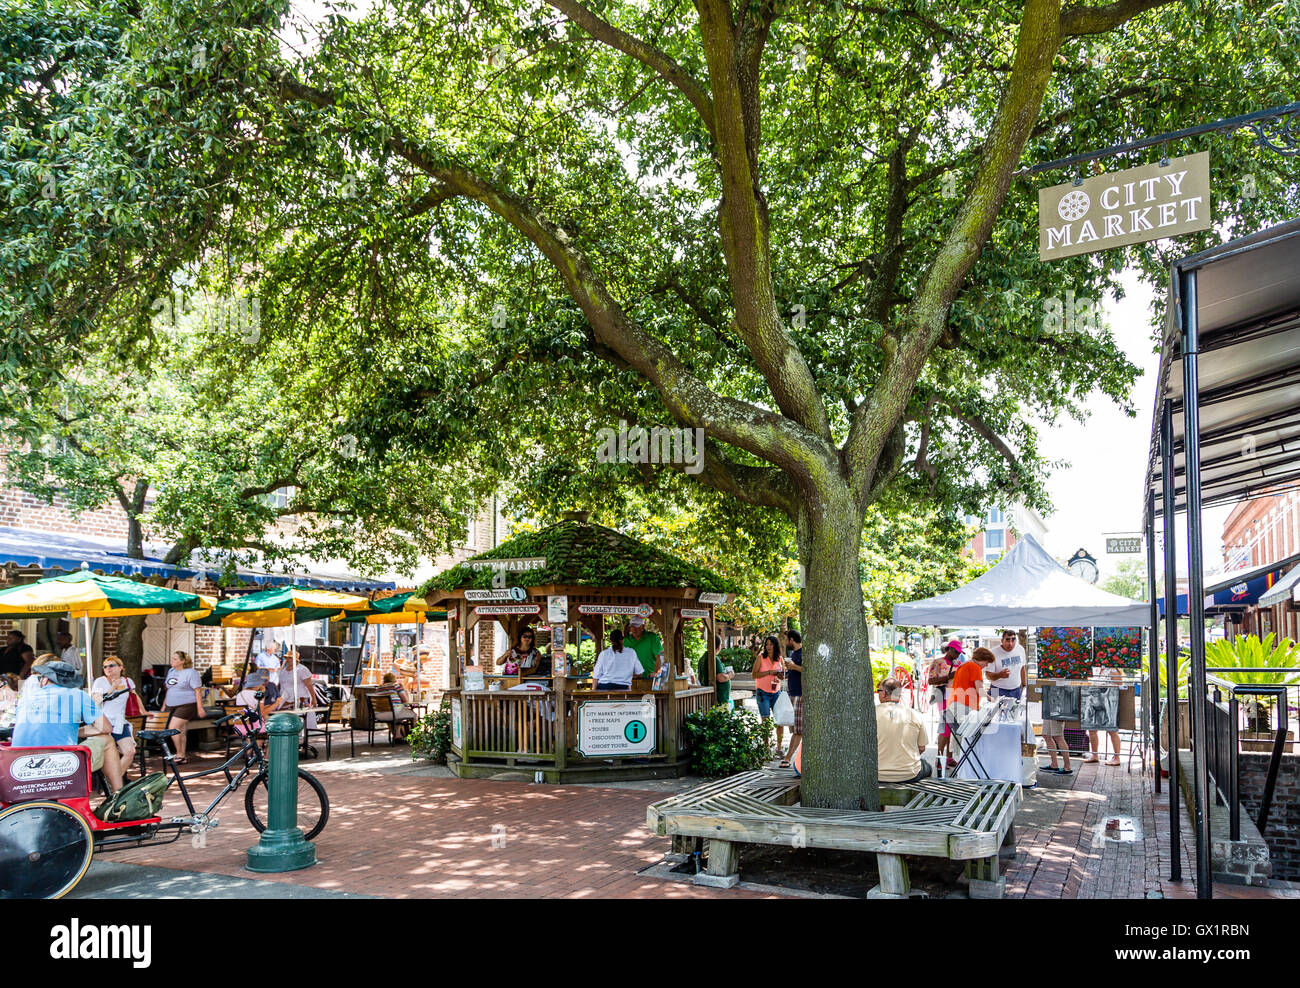 Information Booth in Savannah City Market with tourists Stock Photo